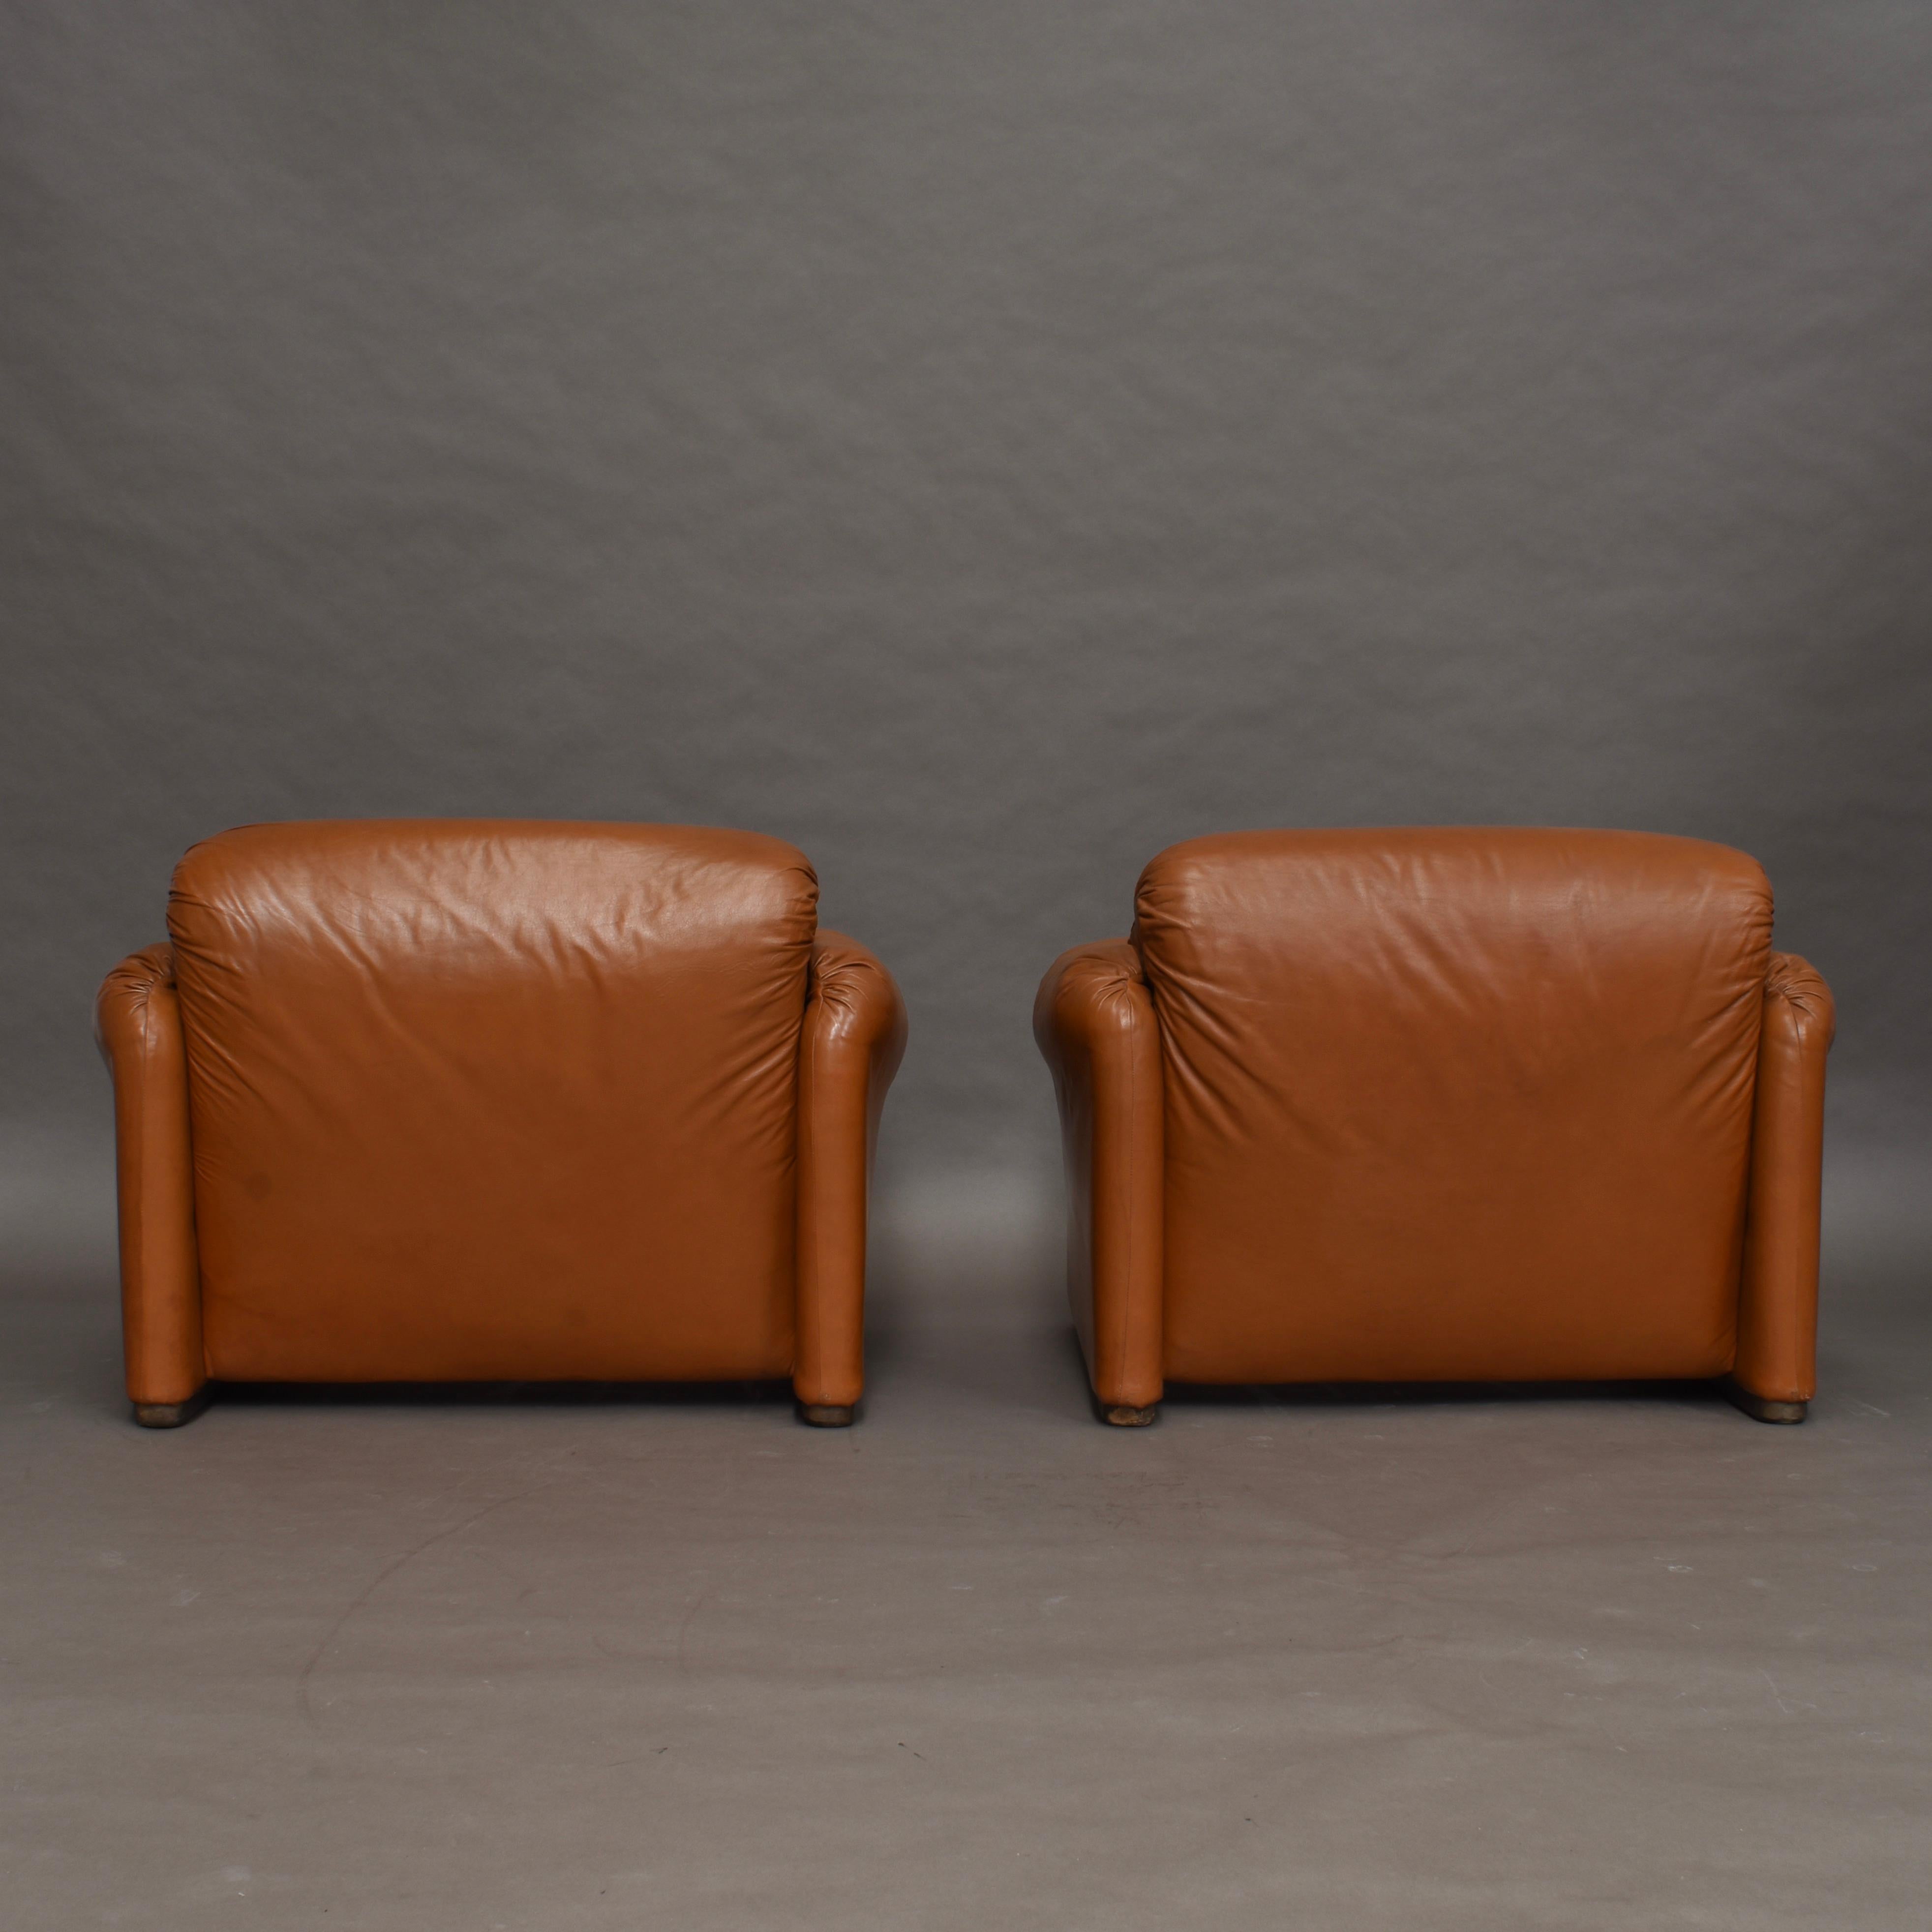 Late 20th Century Early Maralunga Armchairs in Leather by Vico Magistretti for Cassina, Italy 1973